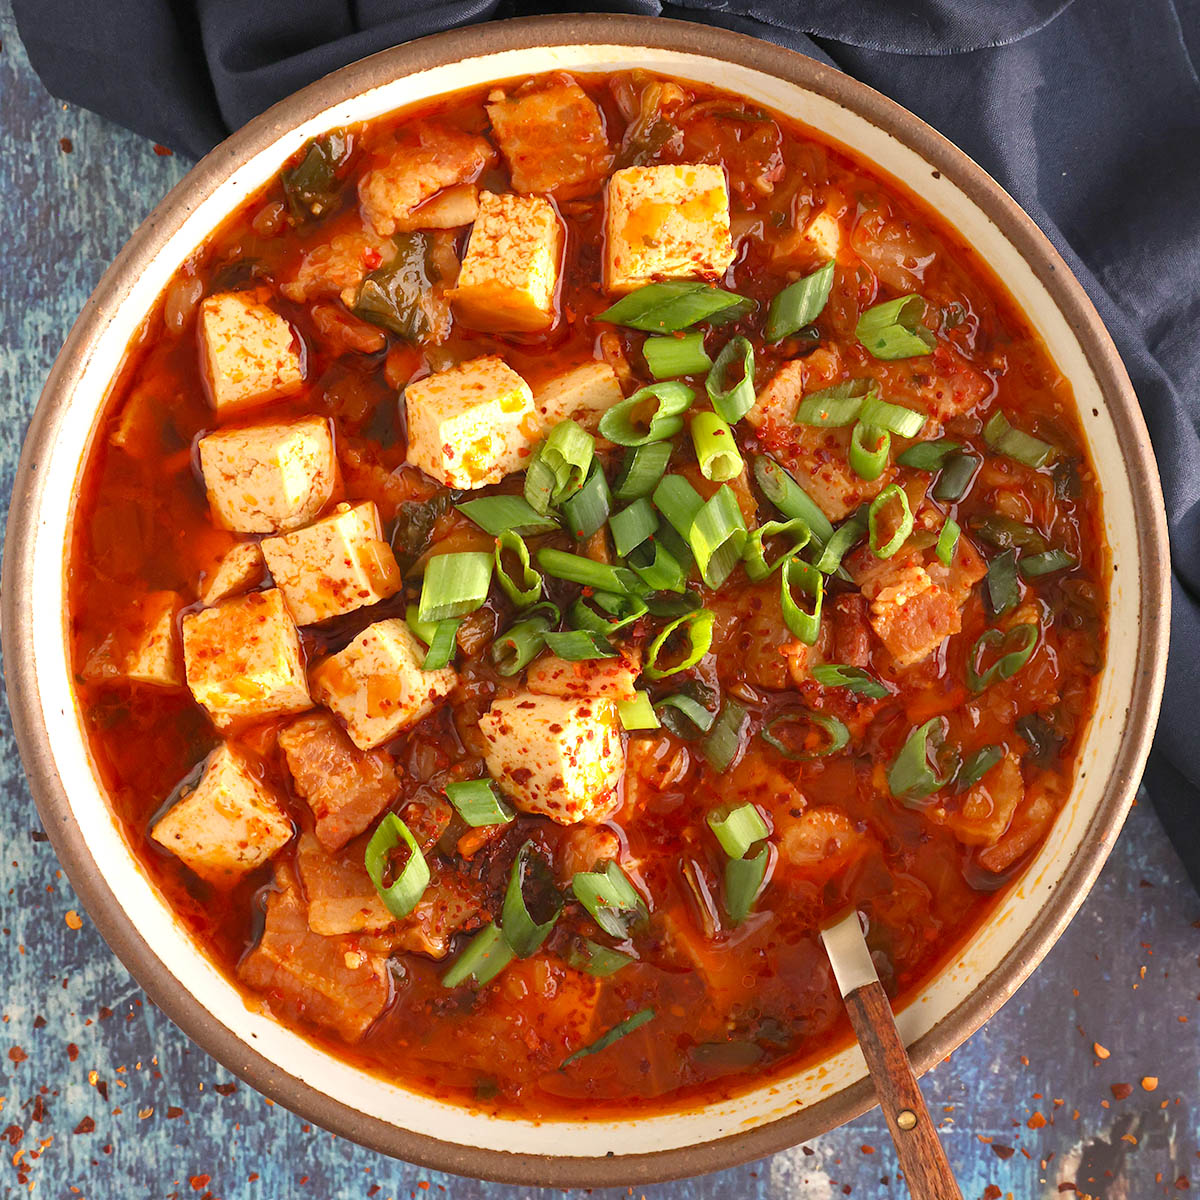 Kimchi jjigae is a classic Korean stew made with kimchi, pork, and tofu in a hearty, savory broth, so loaded with flavor, perfect for spicy food lovers. It's easy to customize! 🍲 GET THE RECIPE 👉👉👉chilipeppermadness.com/recipes/kimchi… #Foodie #RecipeOfTheDay #Recipe #Kimchi #Stew